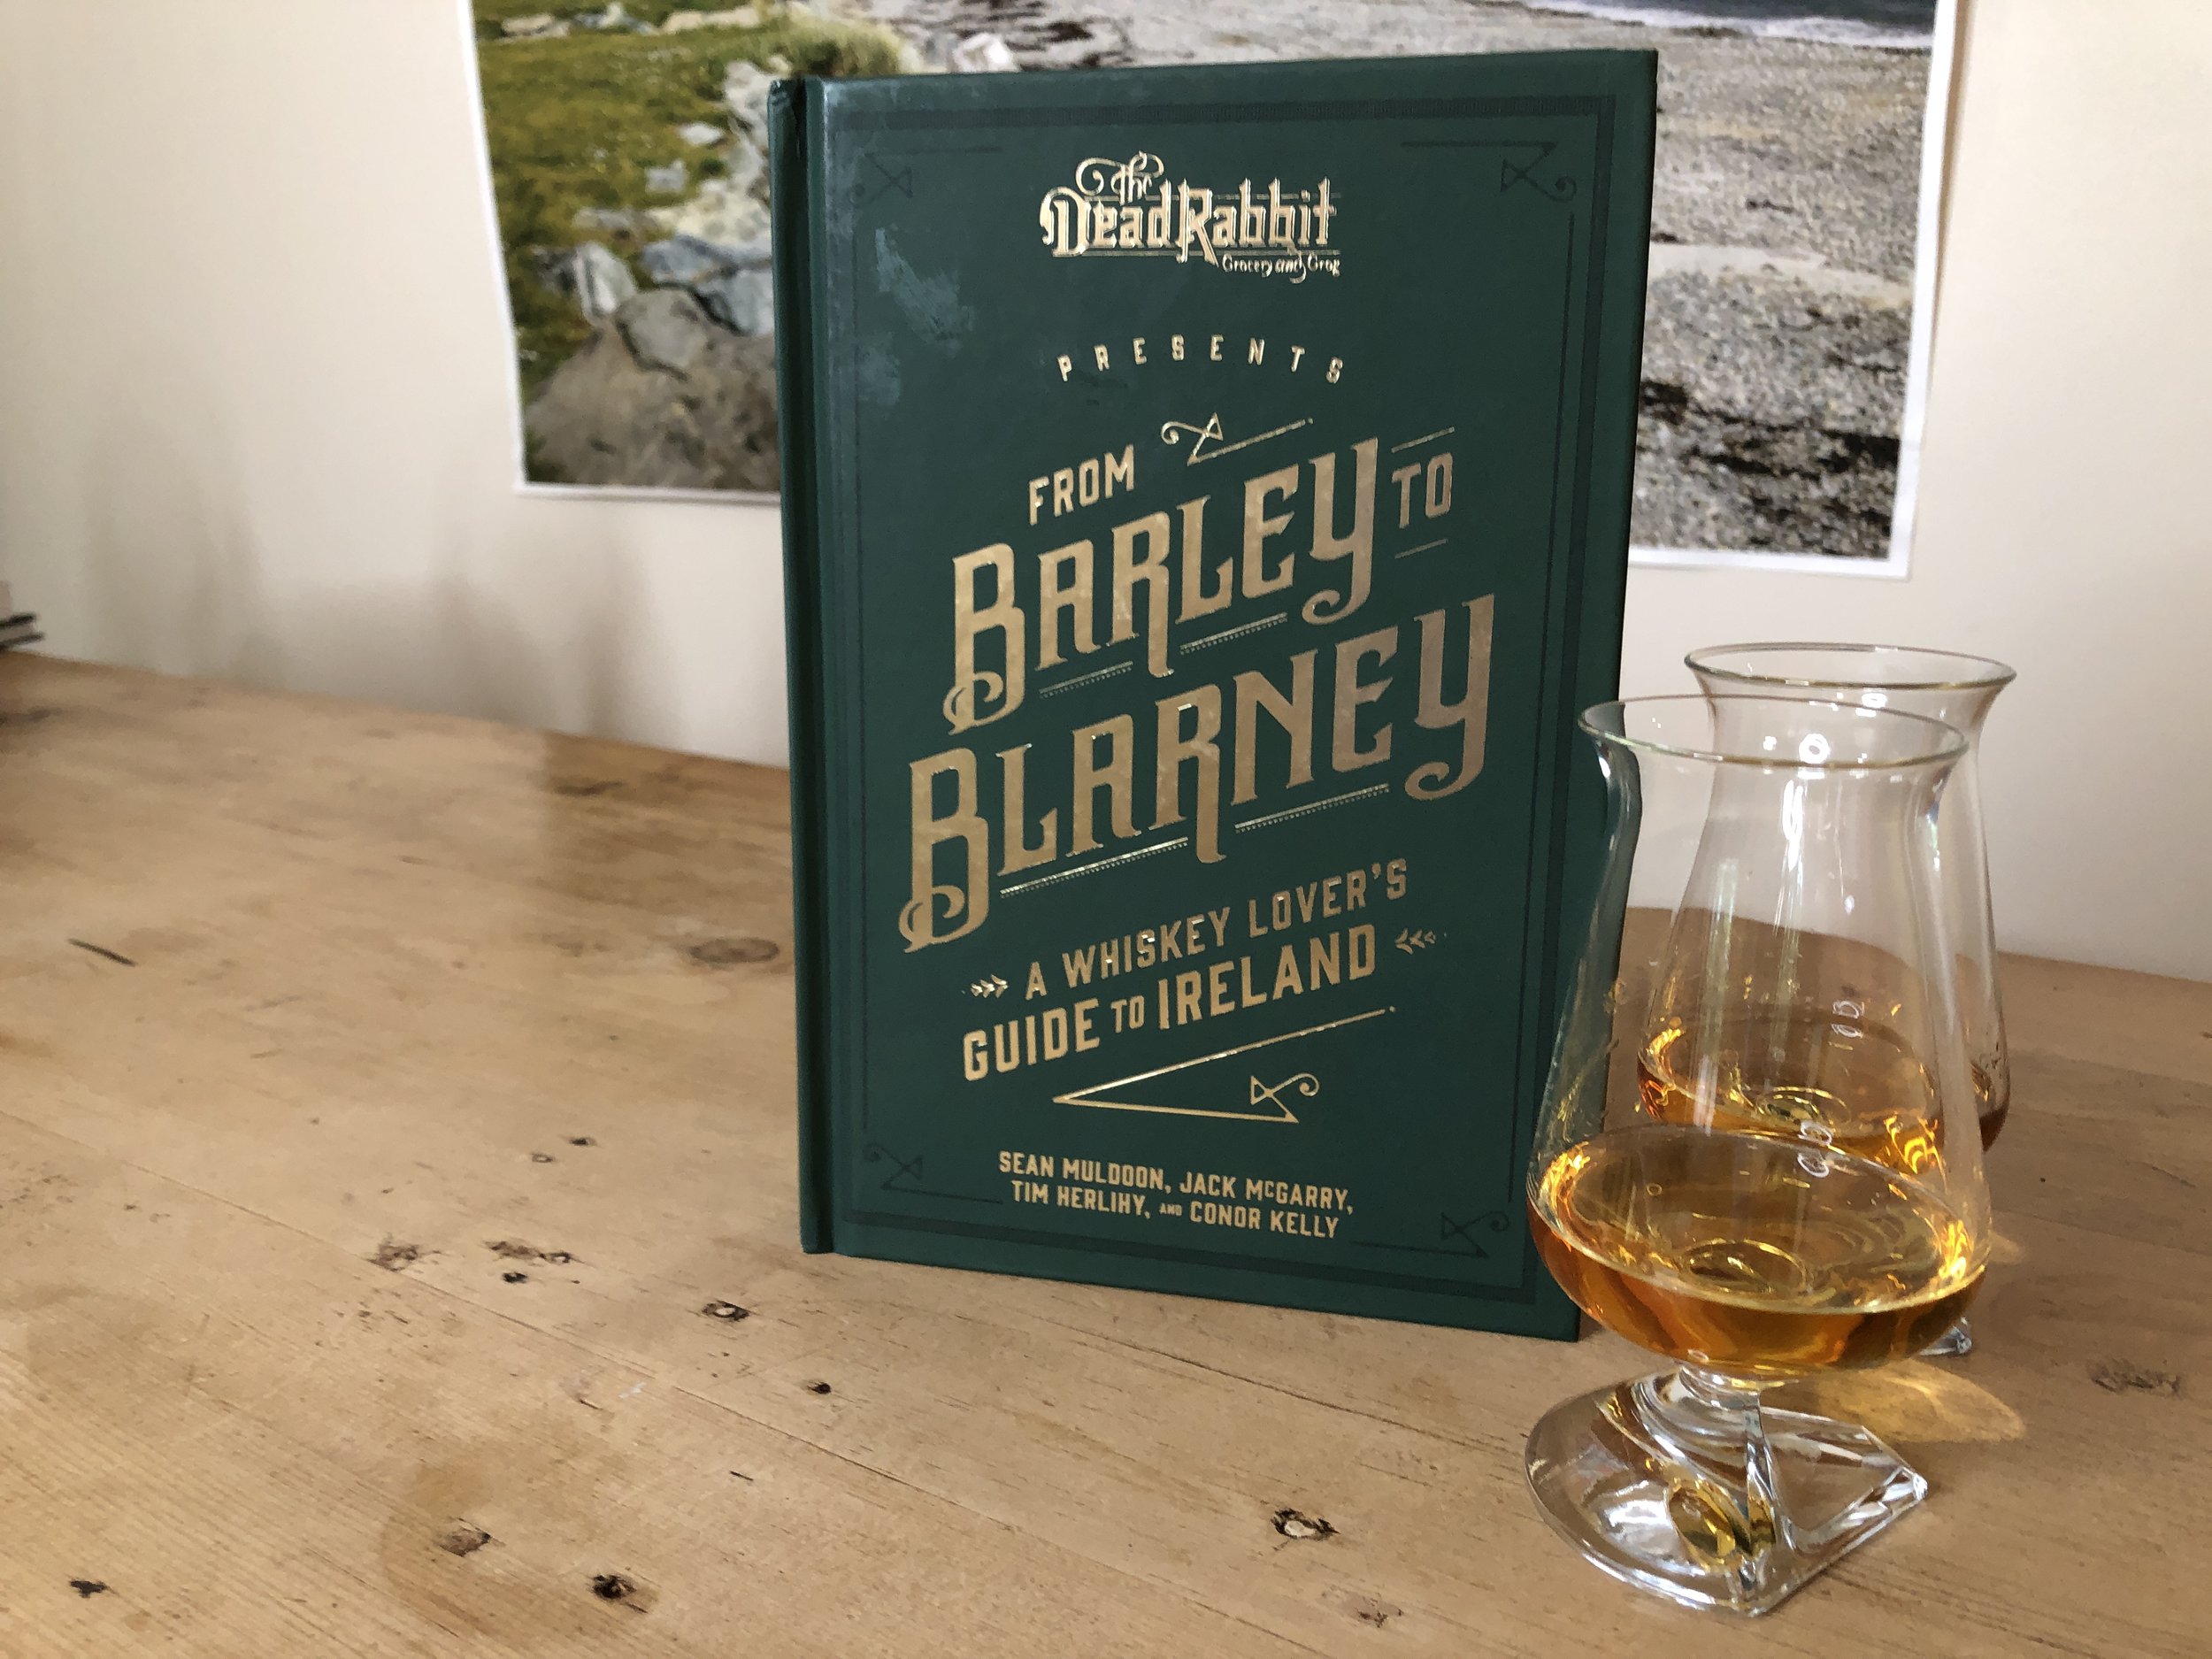 Barley to Blarney Book Cover with full glasses Land.JPG